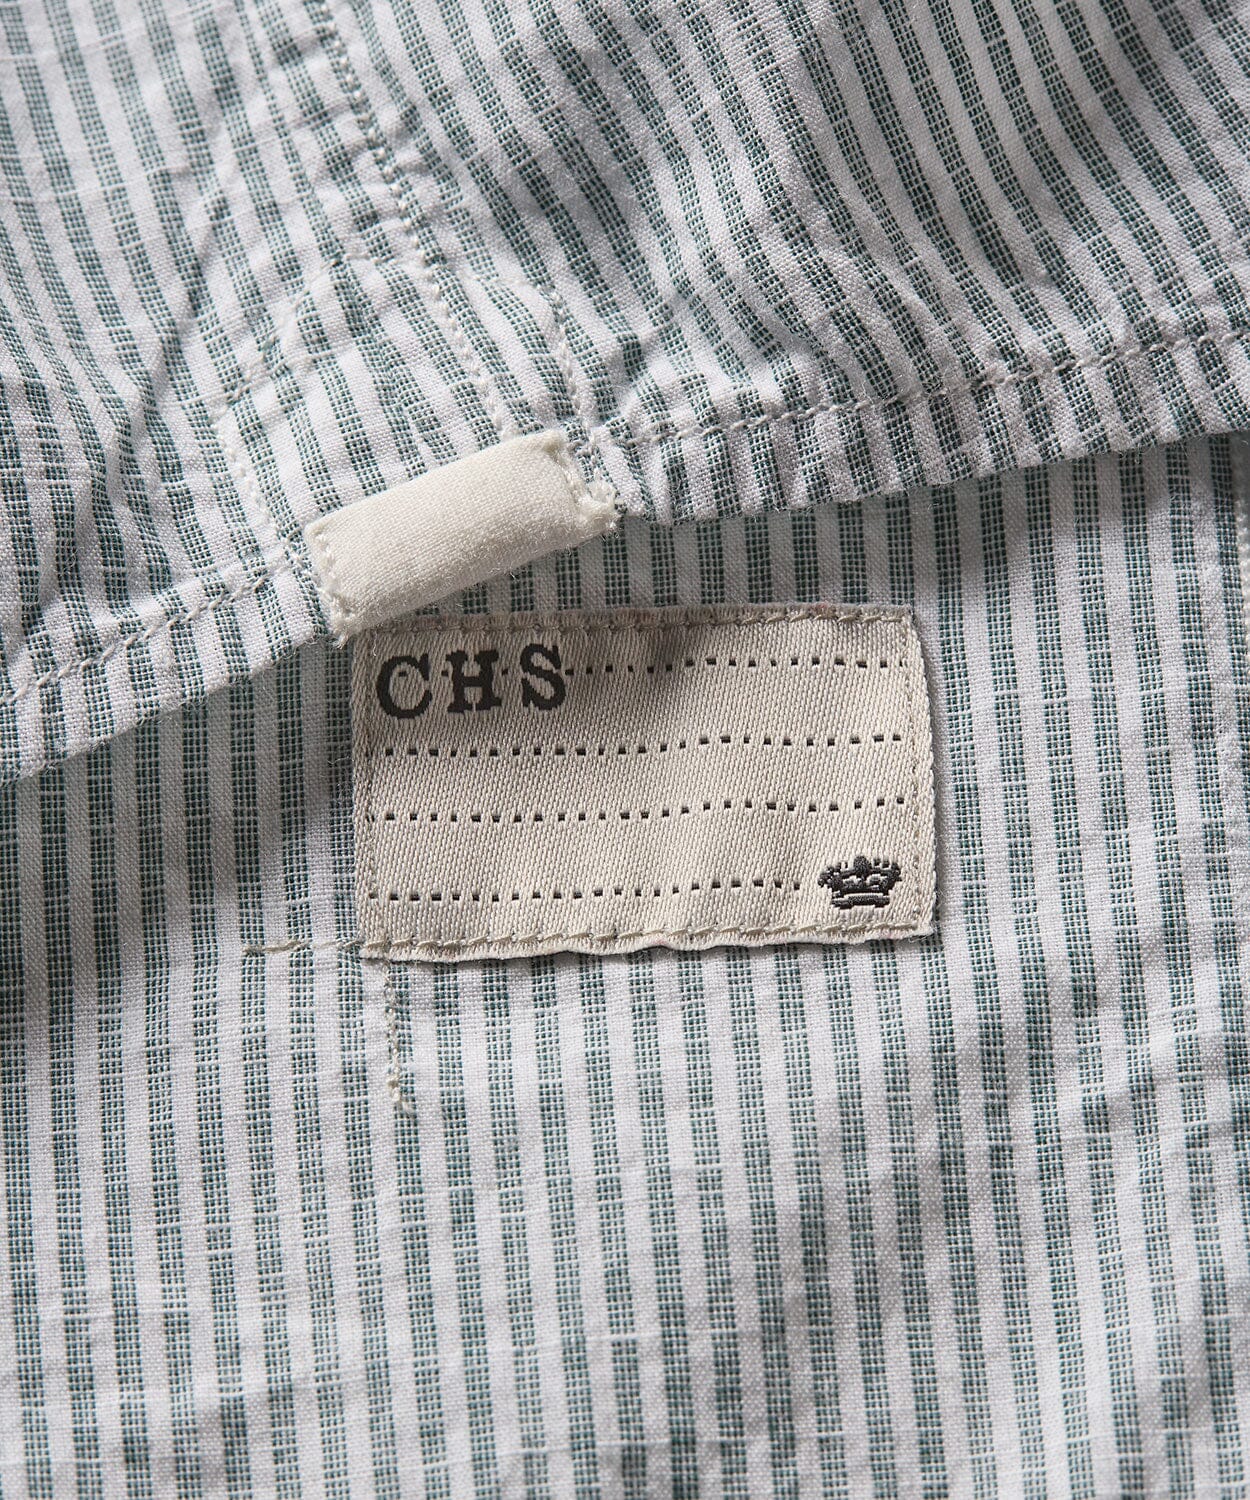 Excella Shirt Button Downs OOBE BRAND 